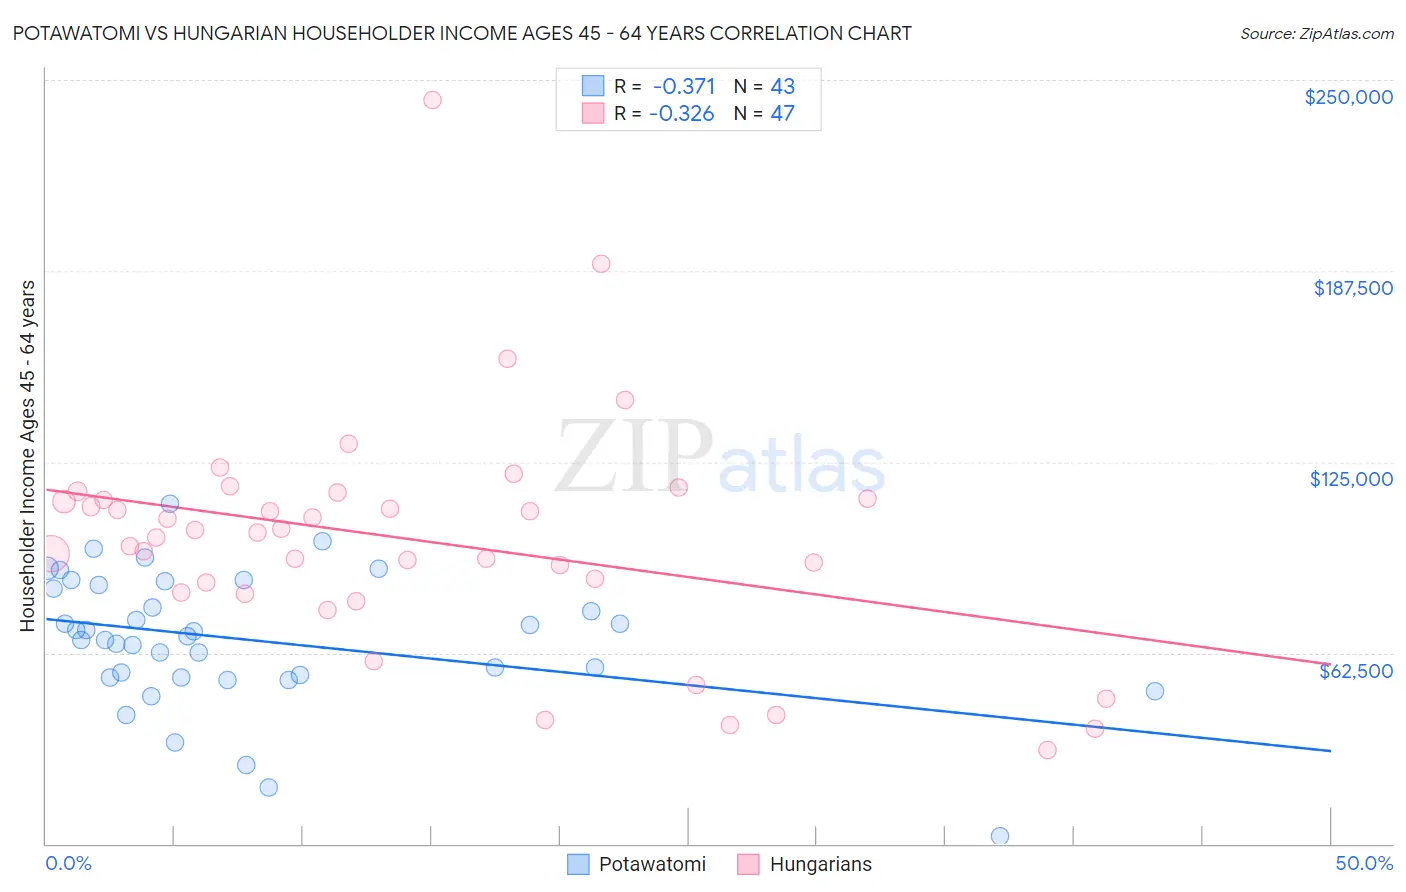 Potawatomi vs Hungarian Householder Income Ages 45 - 64 years